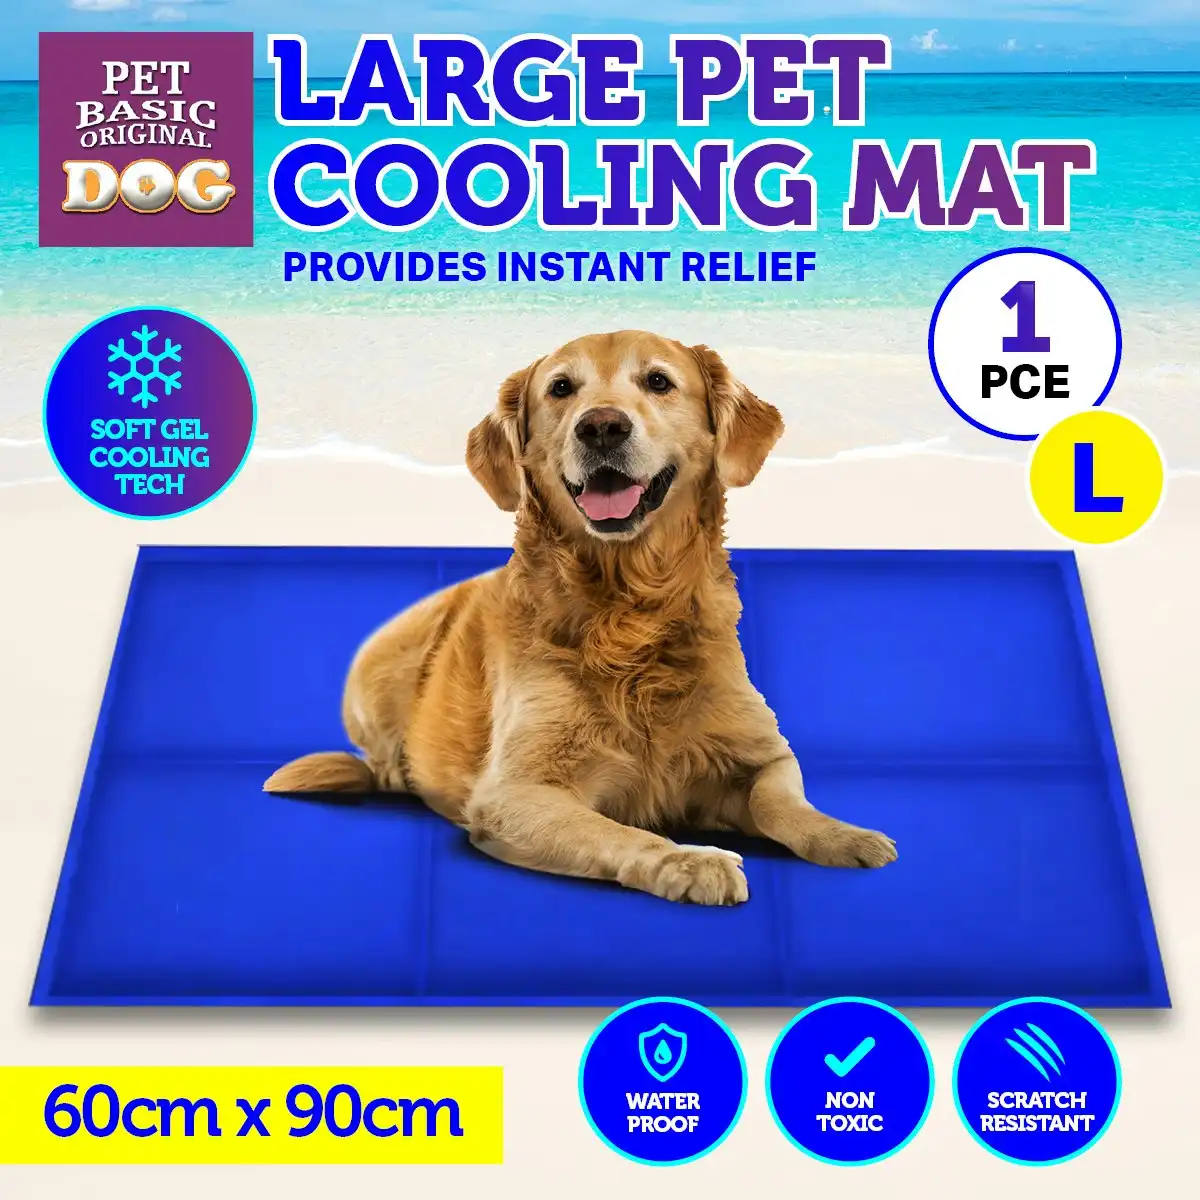 Pet Basic Dog Cooling Mat Instant Relief Non Toxic Large 60cm x 90cm